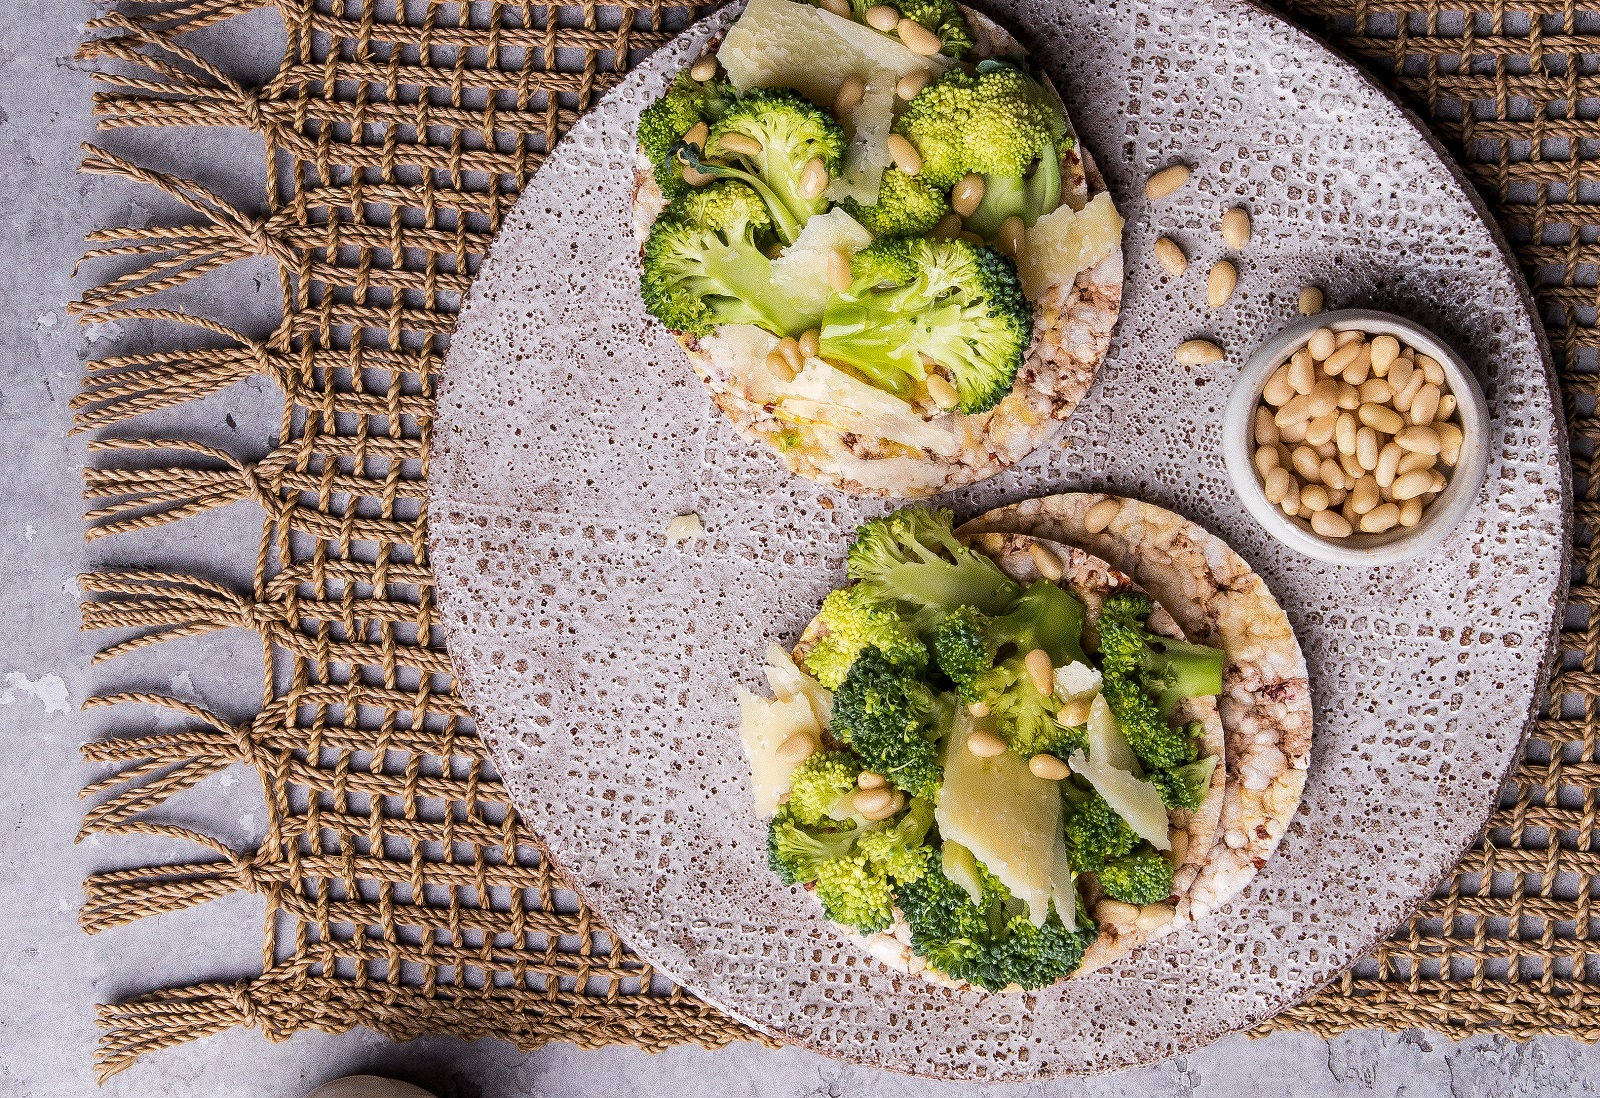 Broccoli, Parmesan, Pine Nuts & Extra Olive Oil on WHOLE GRAIN THINS Sorghum slices for dinner